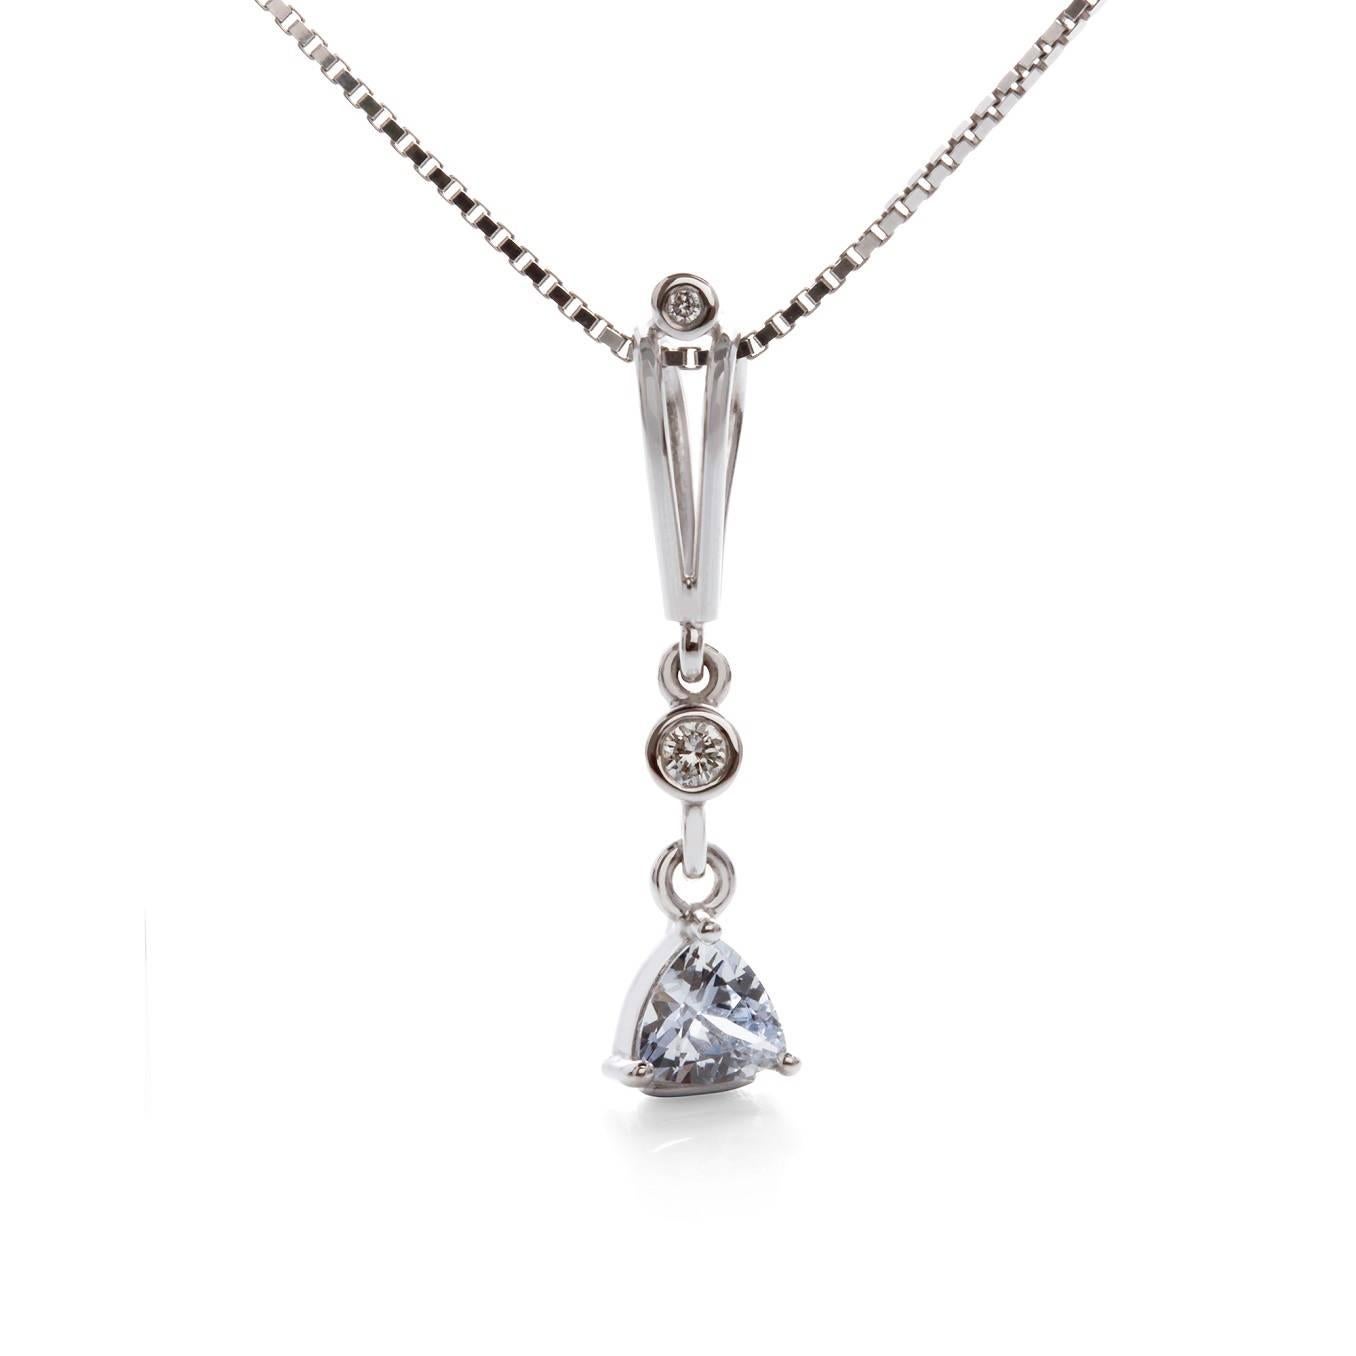 Trillian Zaffiro Necklace

This special pendant is set with a stunning trilliant cut sapphire and two smaller accent diamonds on either side of the fancy split bail. The pendant is suspended from a stylish box chain.

Trilliant cut sapphire: